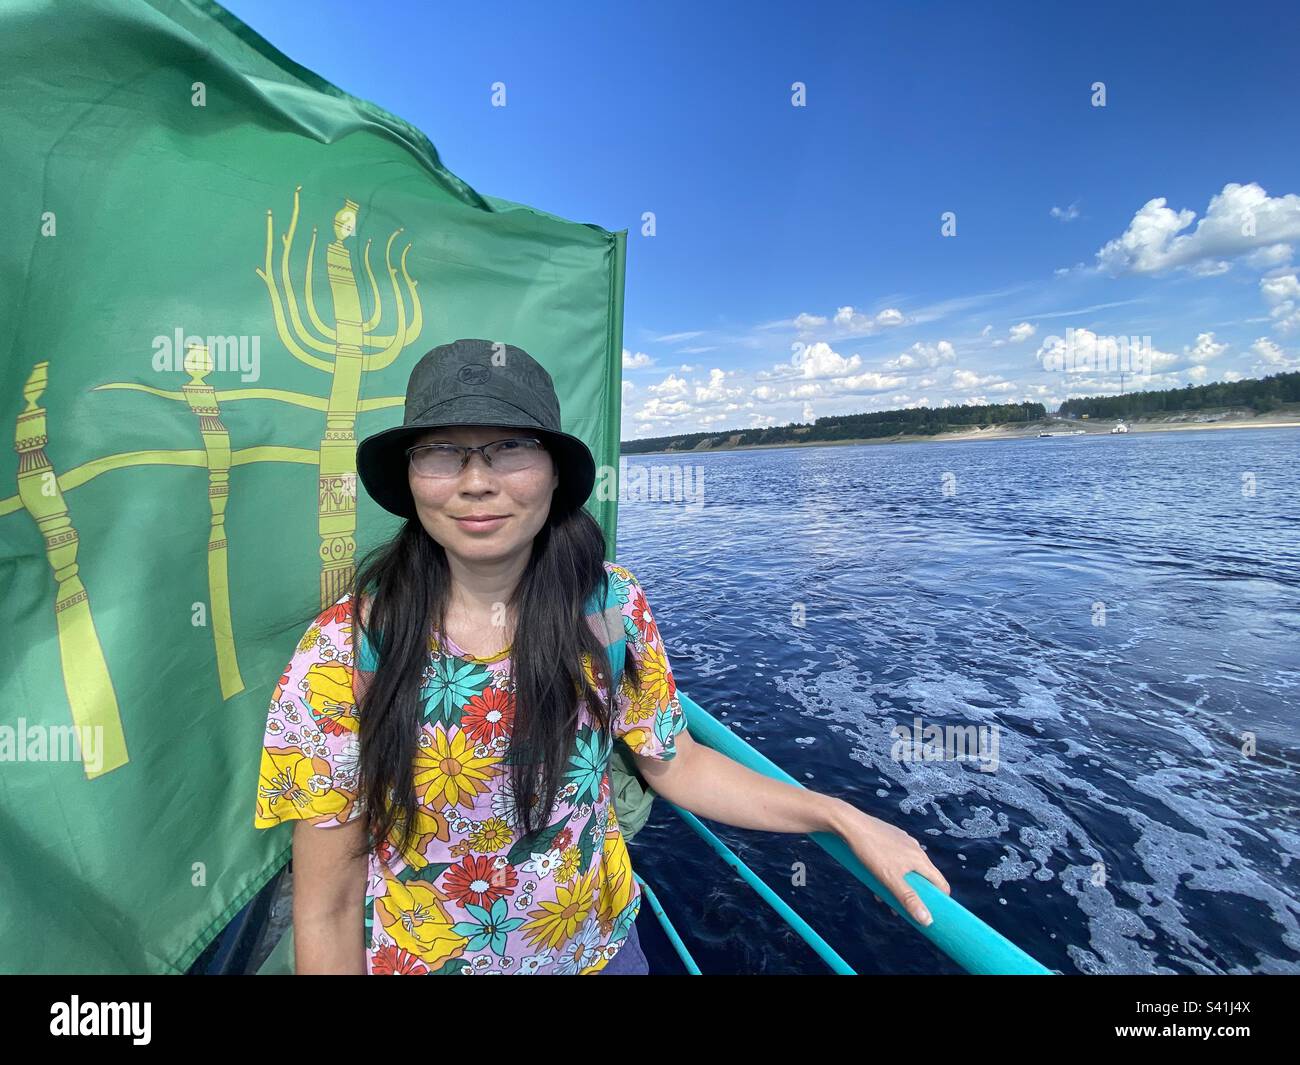 An Asian girl Yakut stands in glasses and a hat smiling on board a ferry going down the river on the background of the flag. Stock Photo